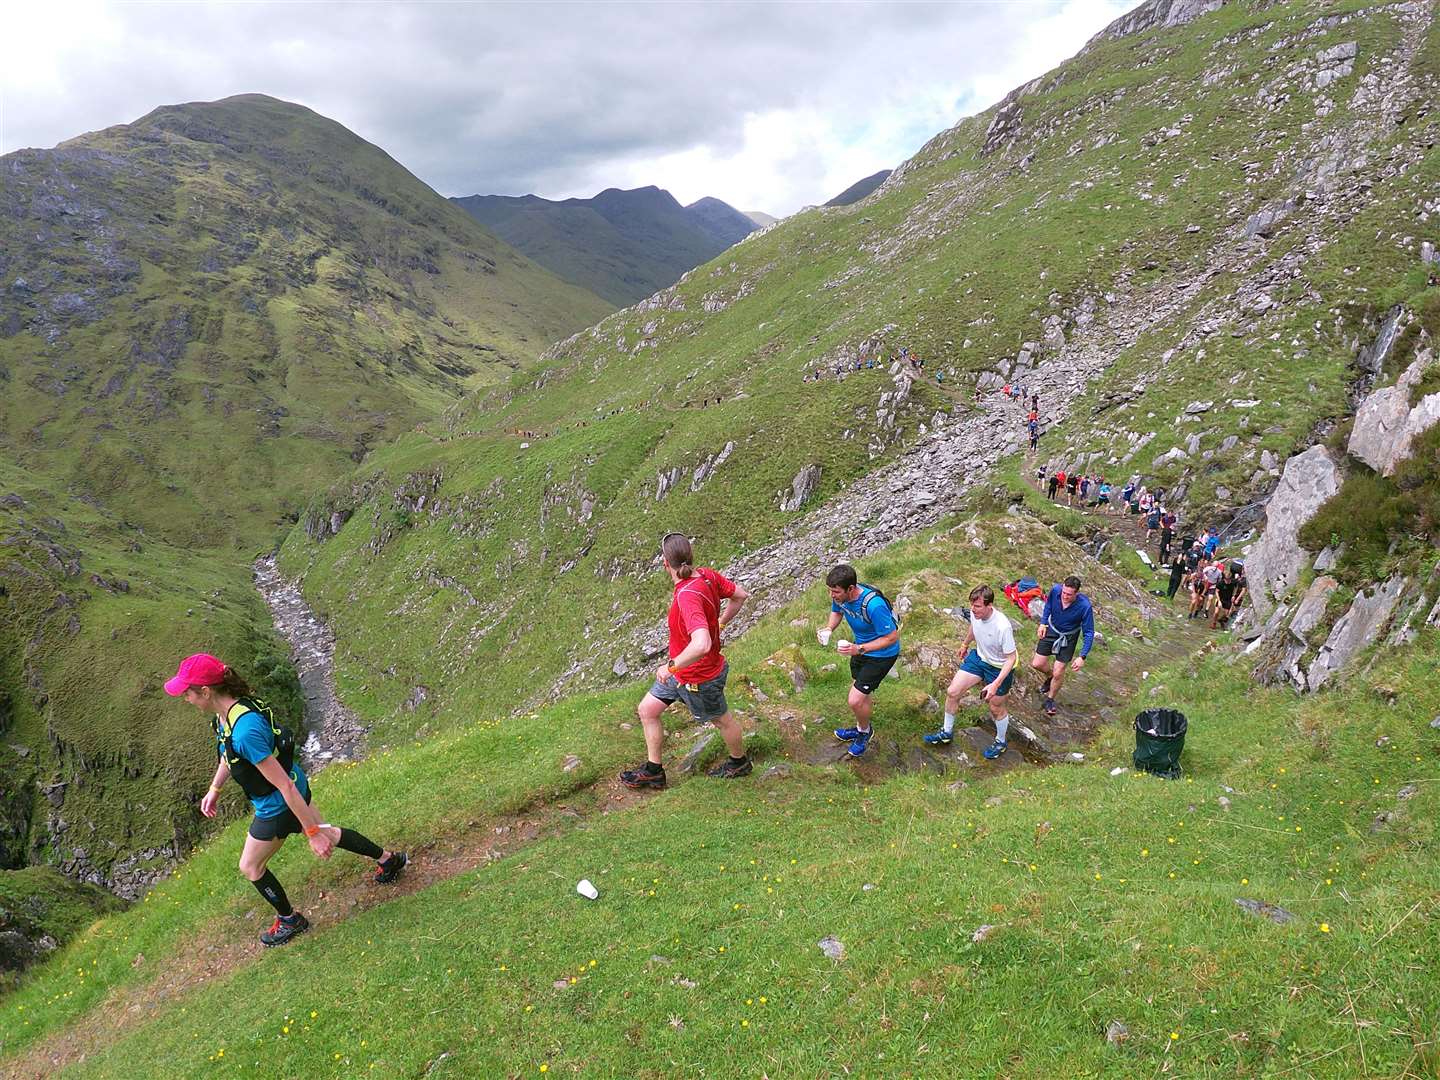 Runners pass the waterfall section near the top of the hill in the 2019 event. Picture: John Davidson